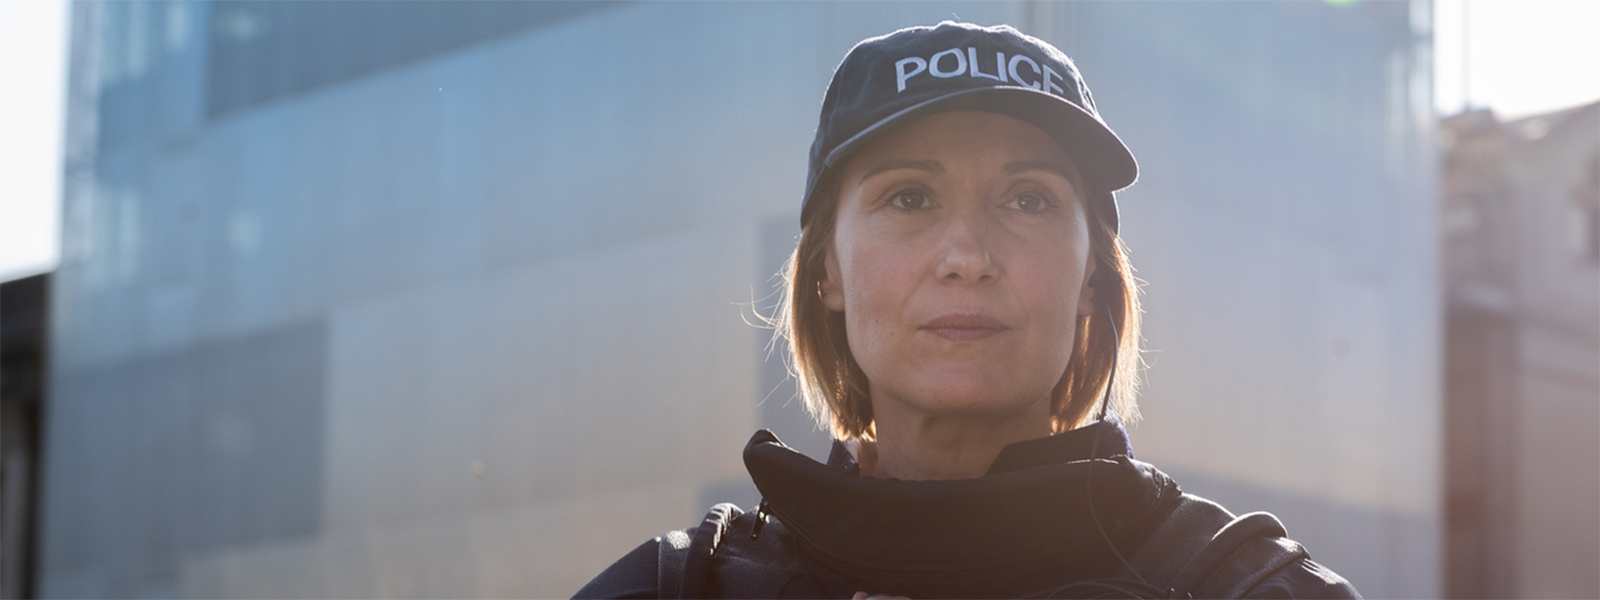 Female-police-officer-in-front-of-a-building-1600x600